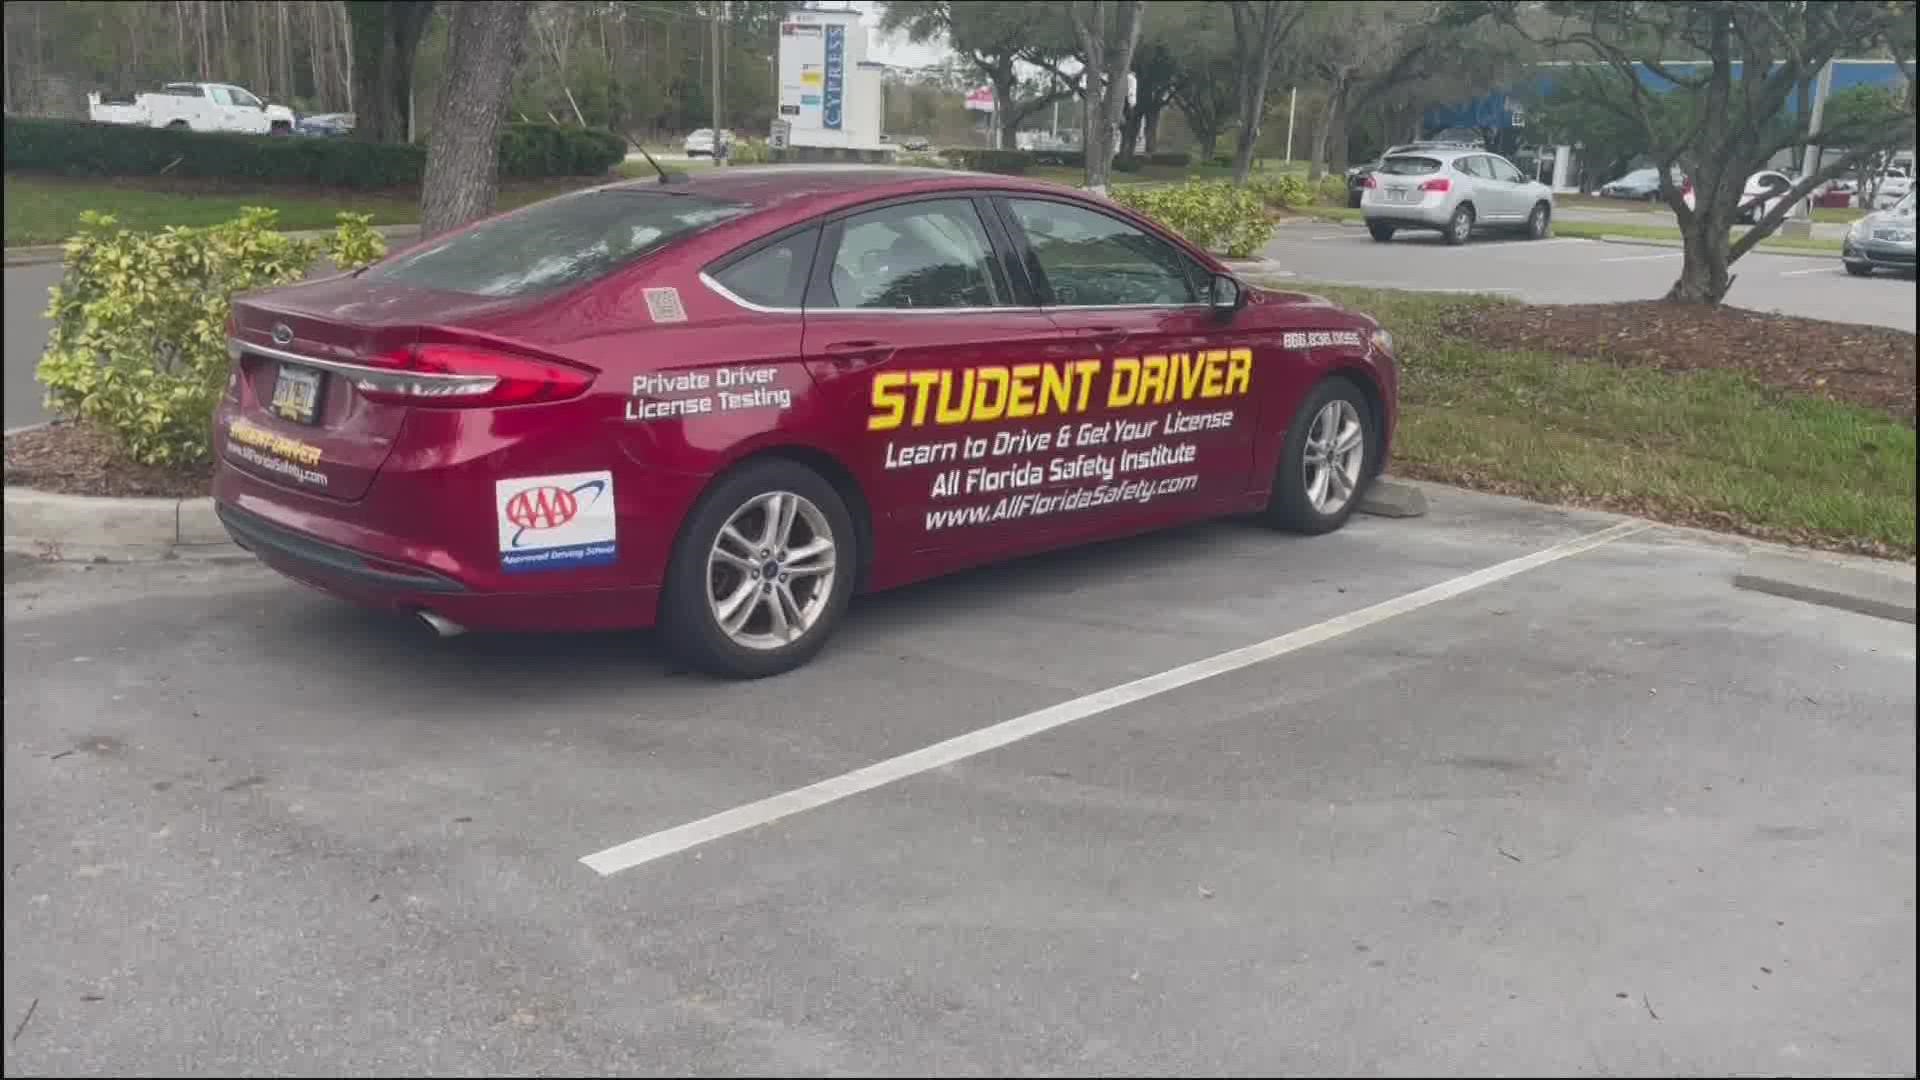 The statewide driving school is accused of taking money from customers, but not offering any services.